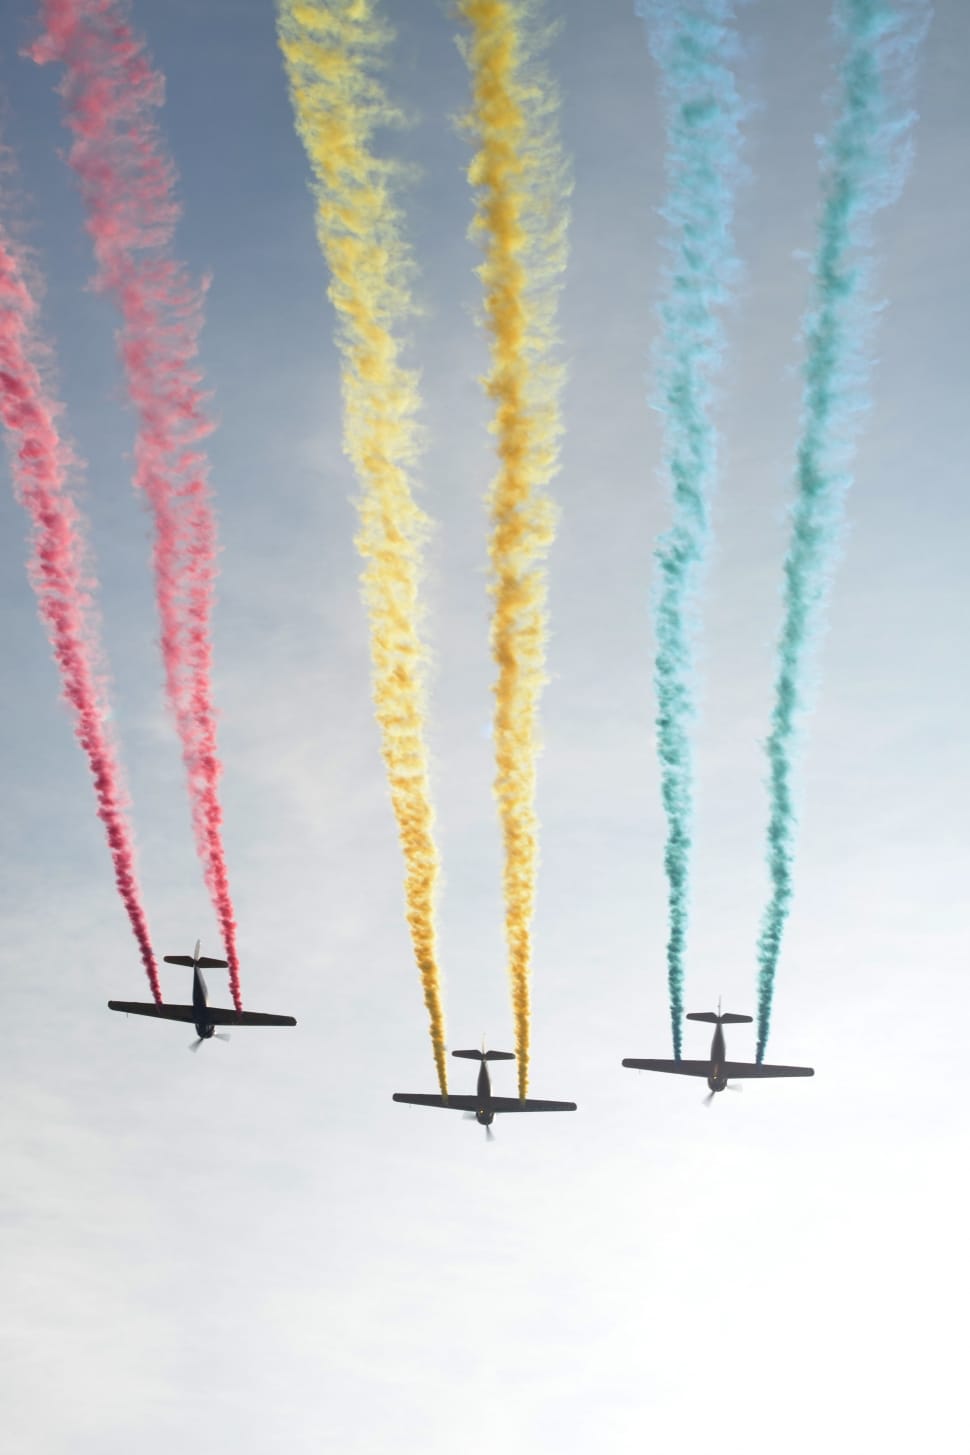 three airplanes discharging red yellow and blue smokes in air during daytime preview